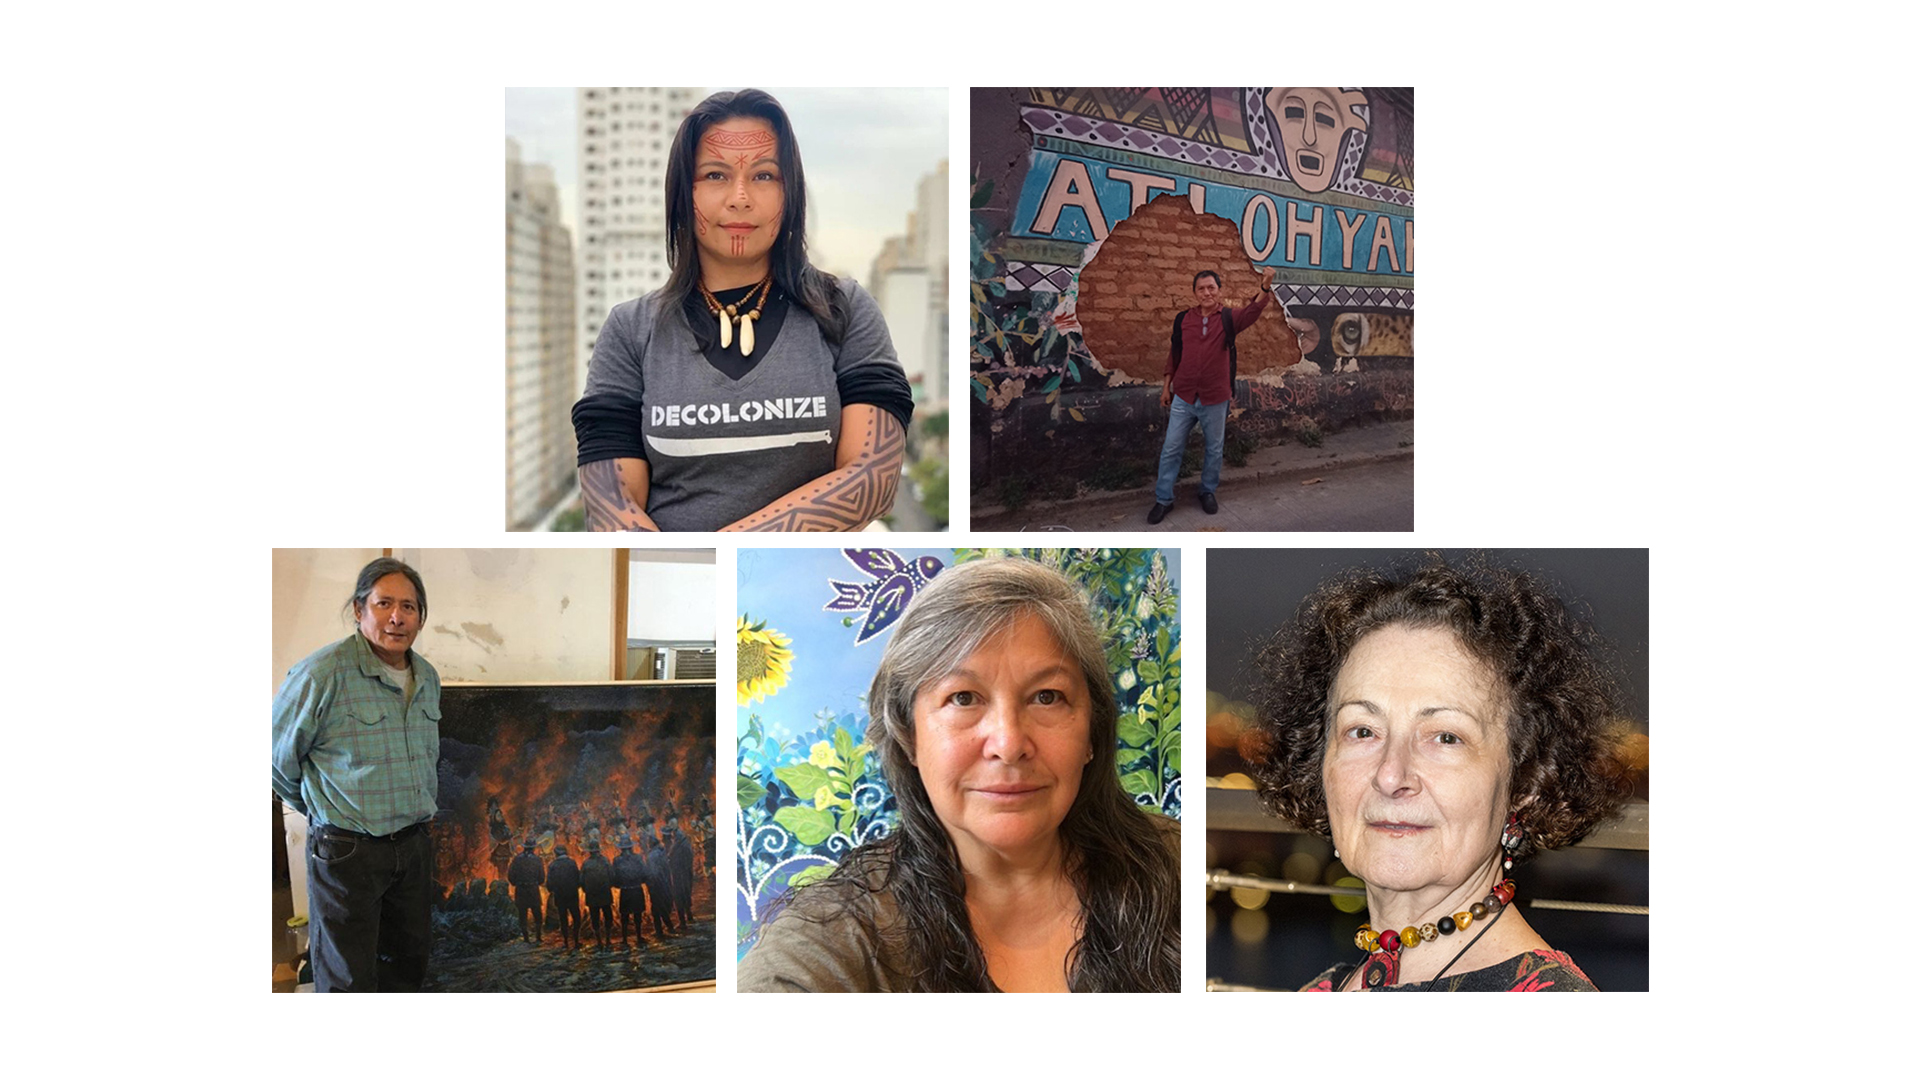 You are currently viewing Multigenerational Legacies of Trauma, Resilience and Activism in the Works of Indigenous Visual Artists of the Americas (Webinar)